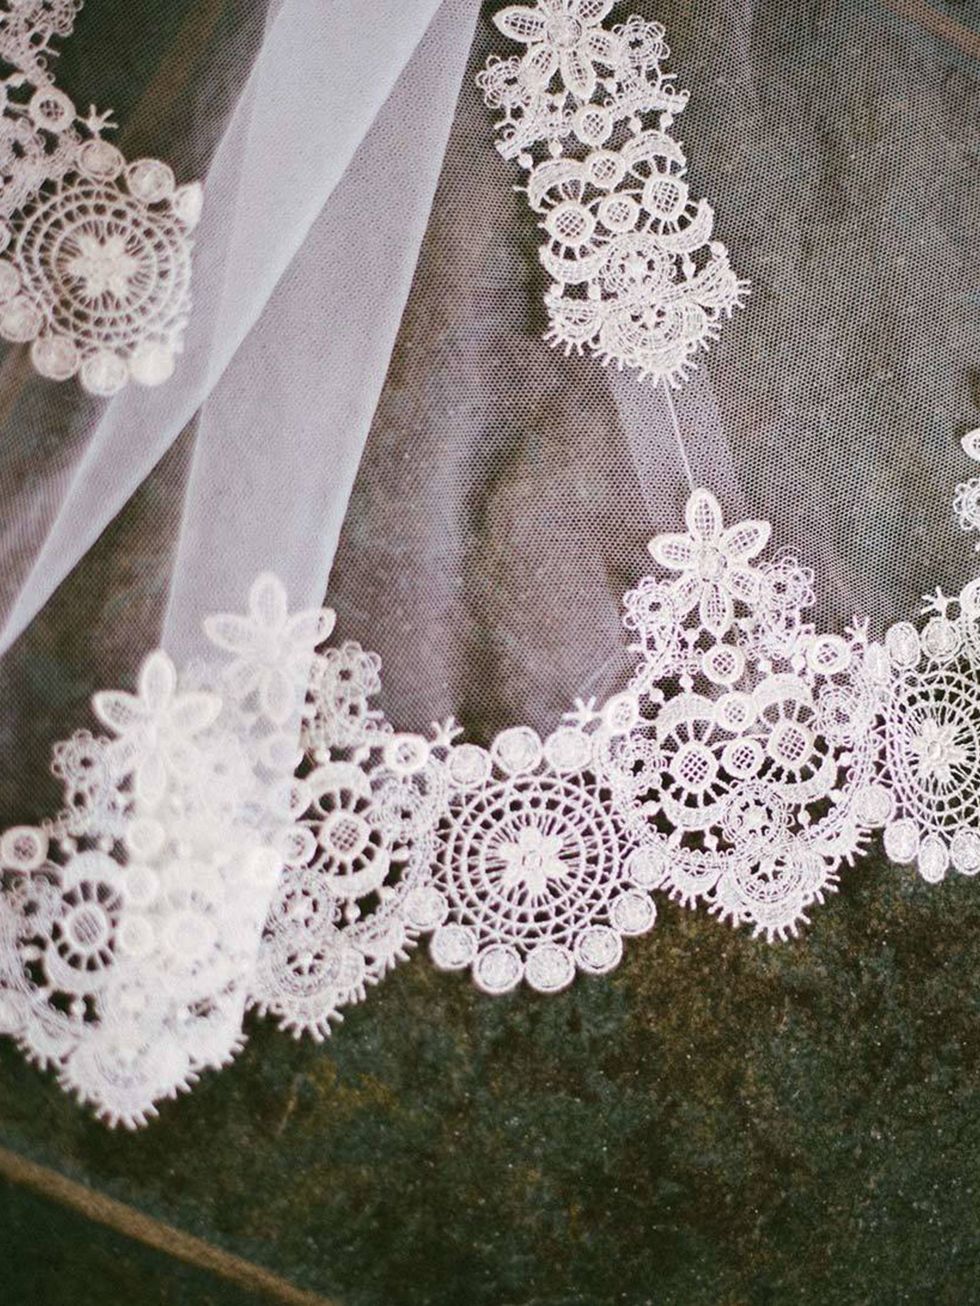 <p>The lace and detail was amazing, and it was all handmade which made it really special.</p>